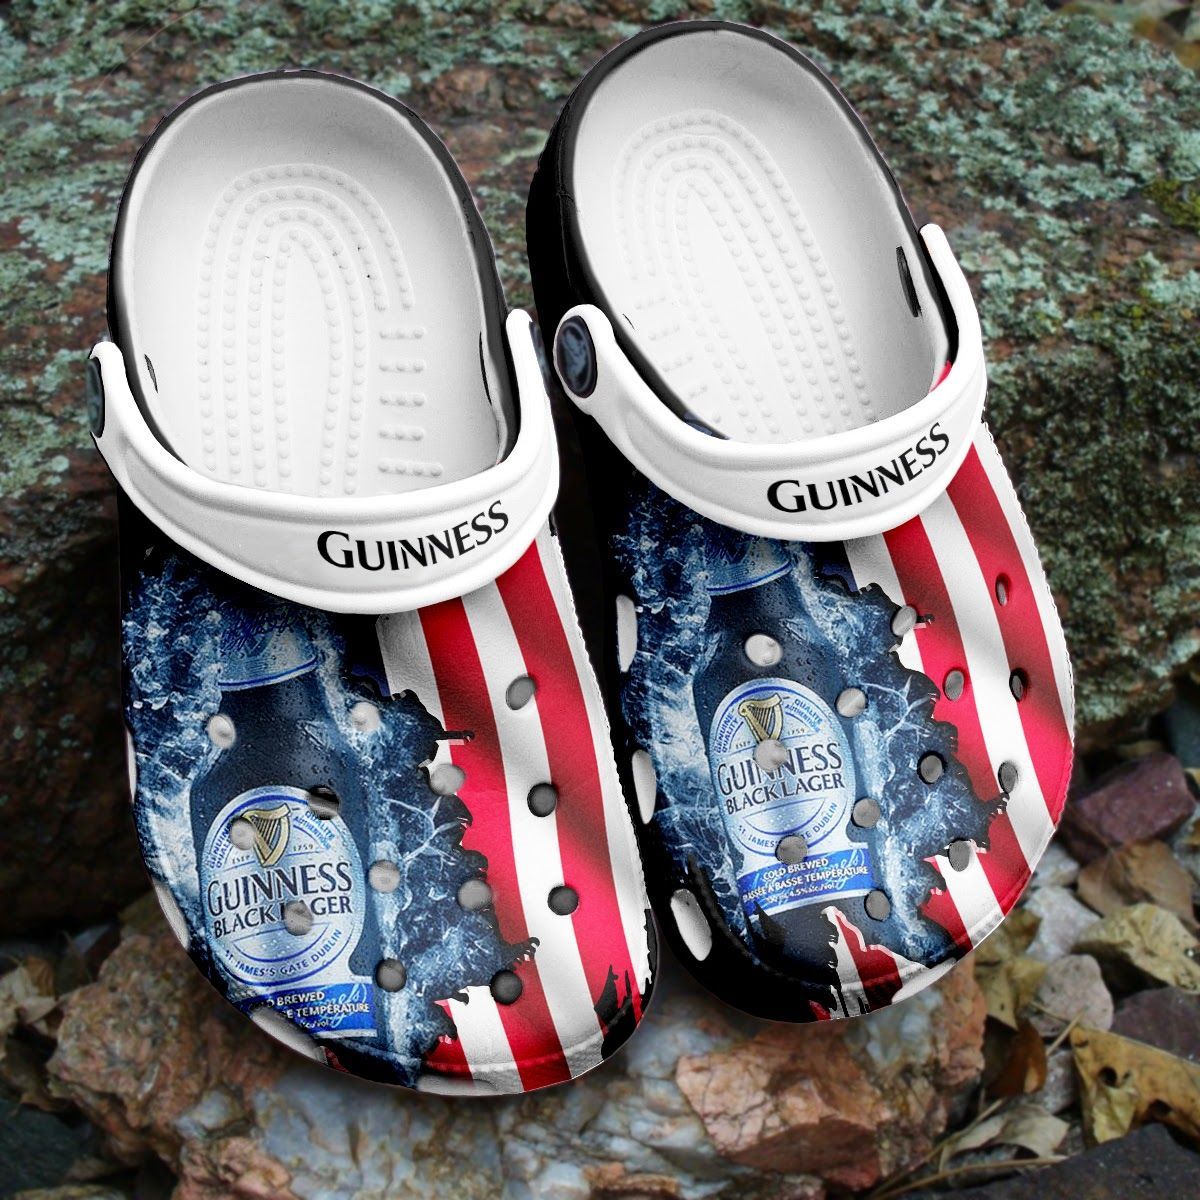 If you'd like to purchase a pair of Crocband Clogs, be sure to check out the official website. 98